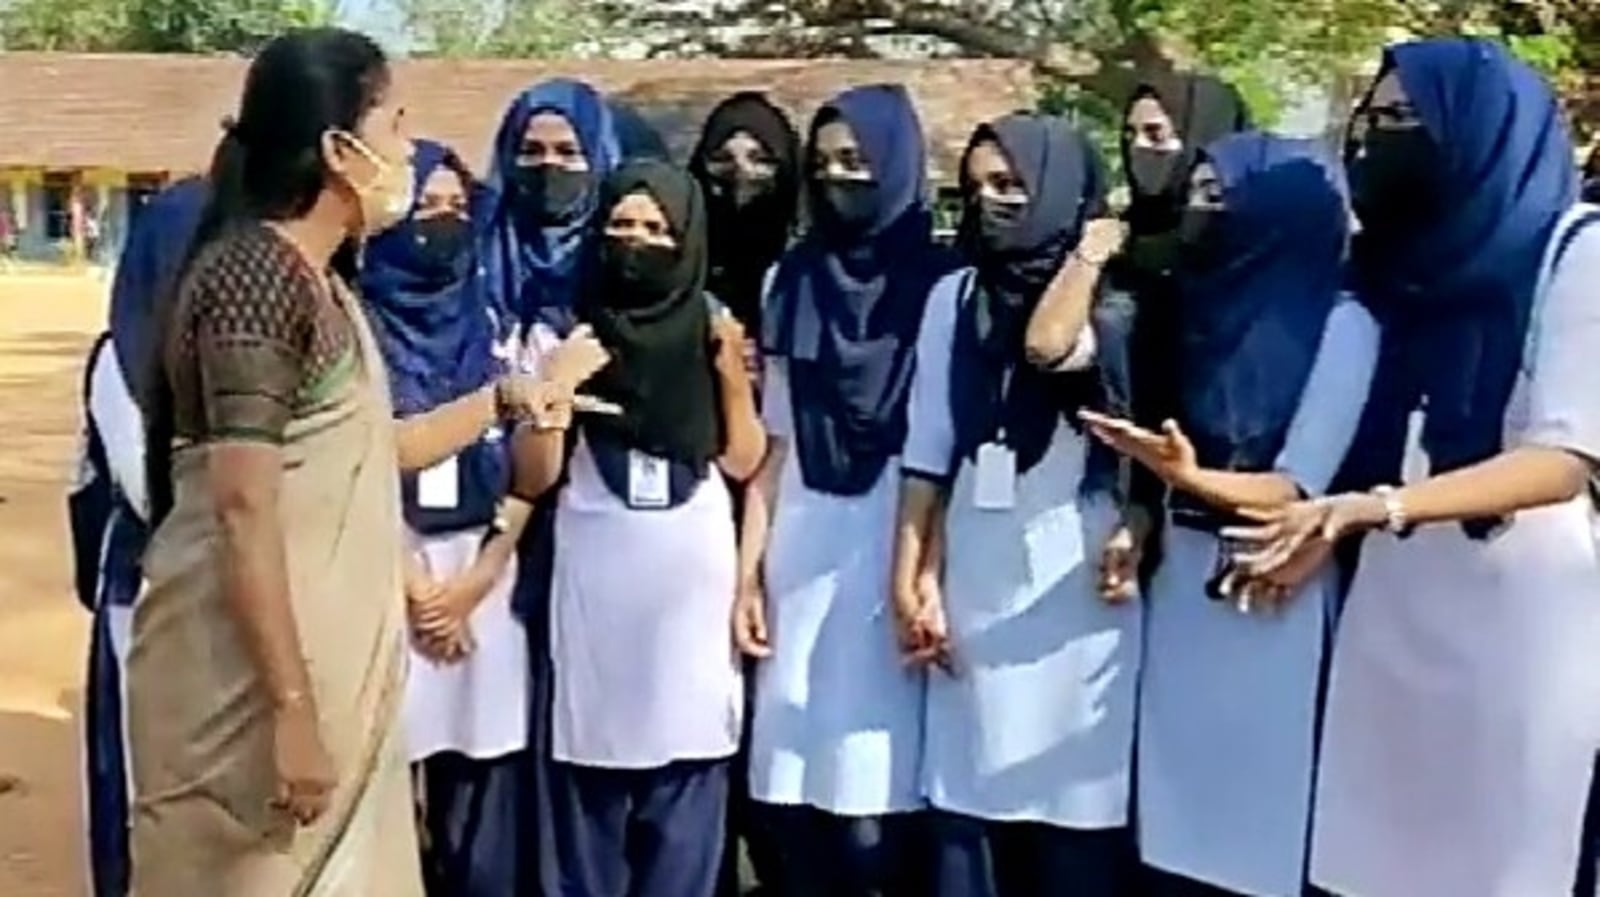 Hijab Ban - Students Should Not Wear Religious Symbols In Educational Institutions : Karnataka Govt Tells High Court